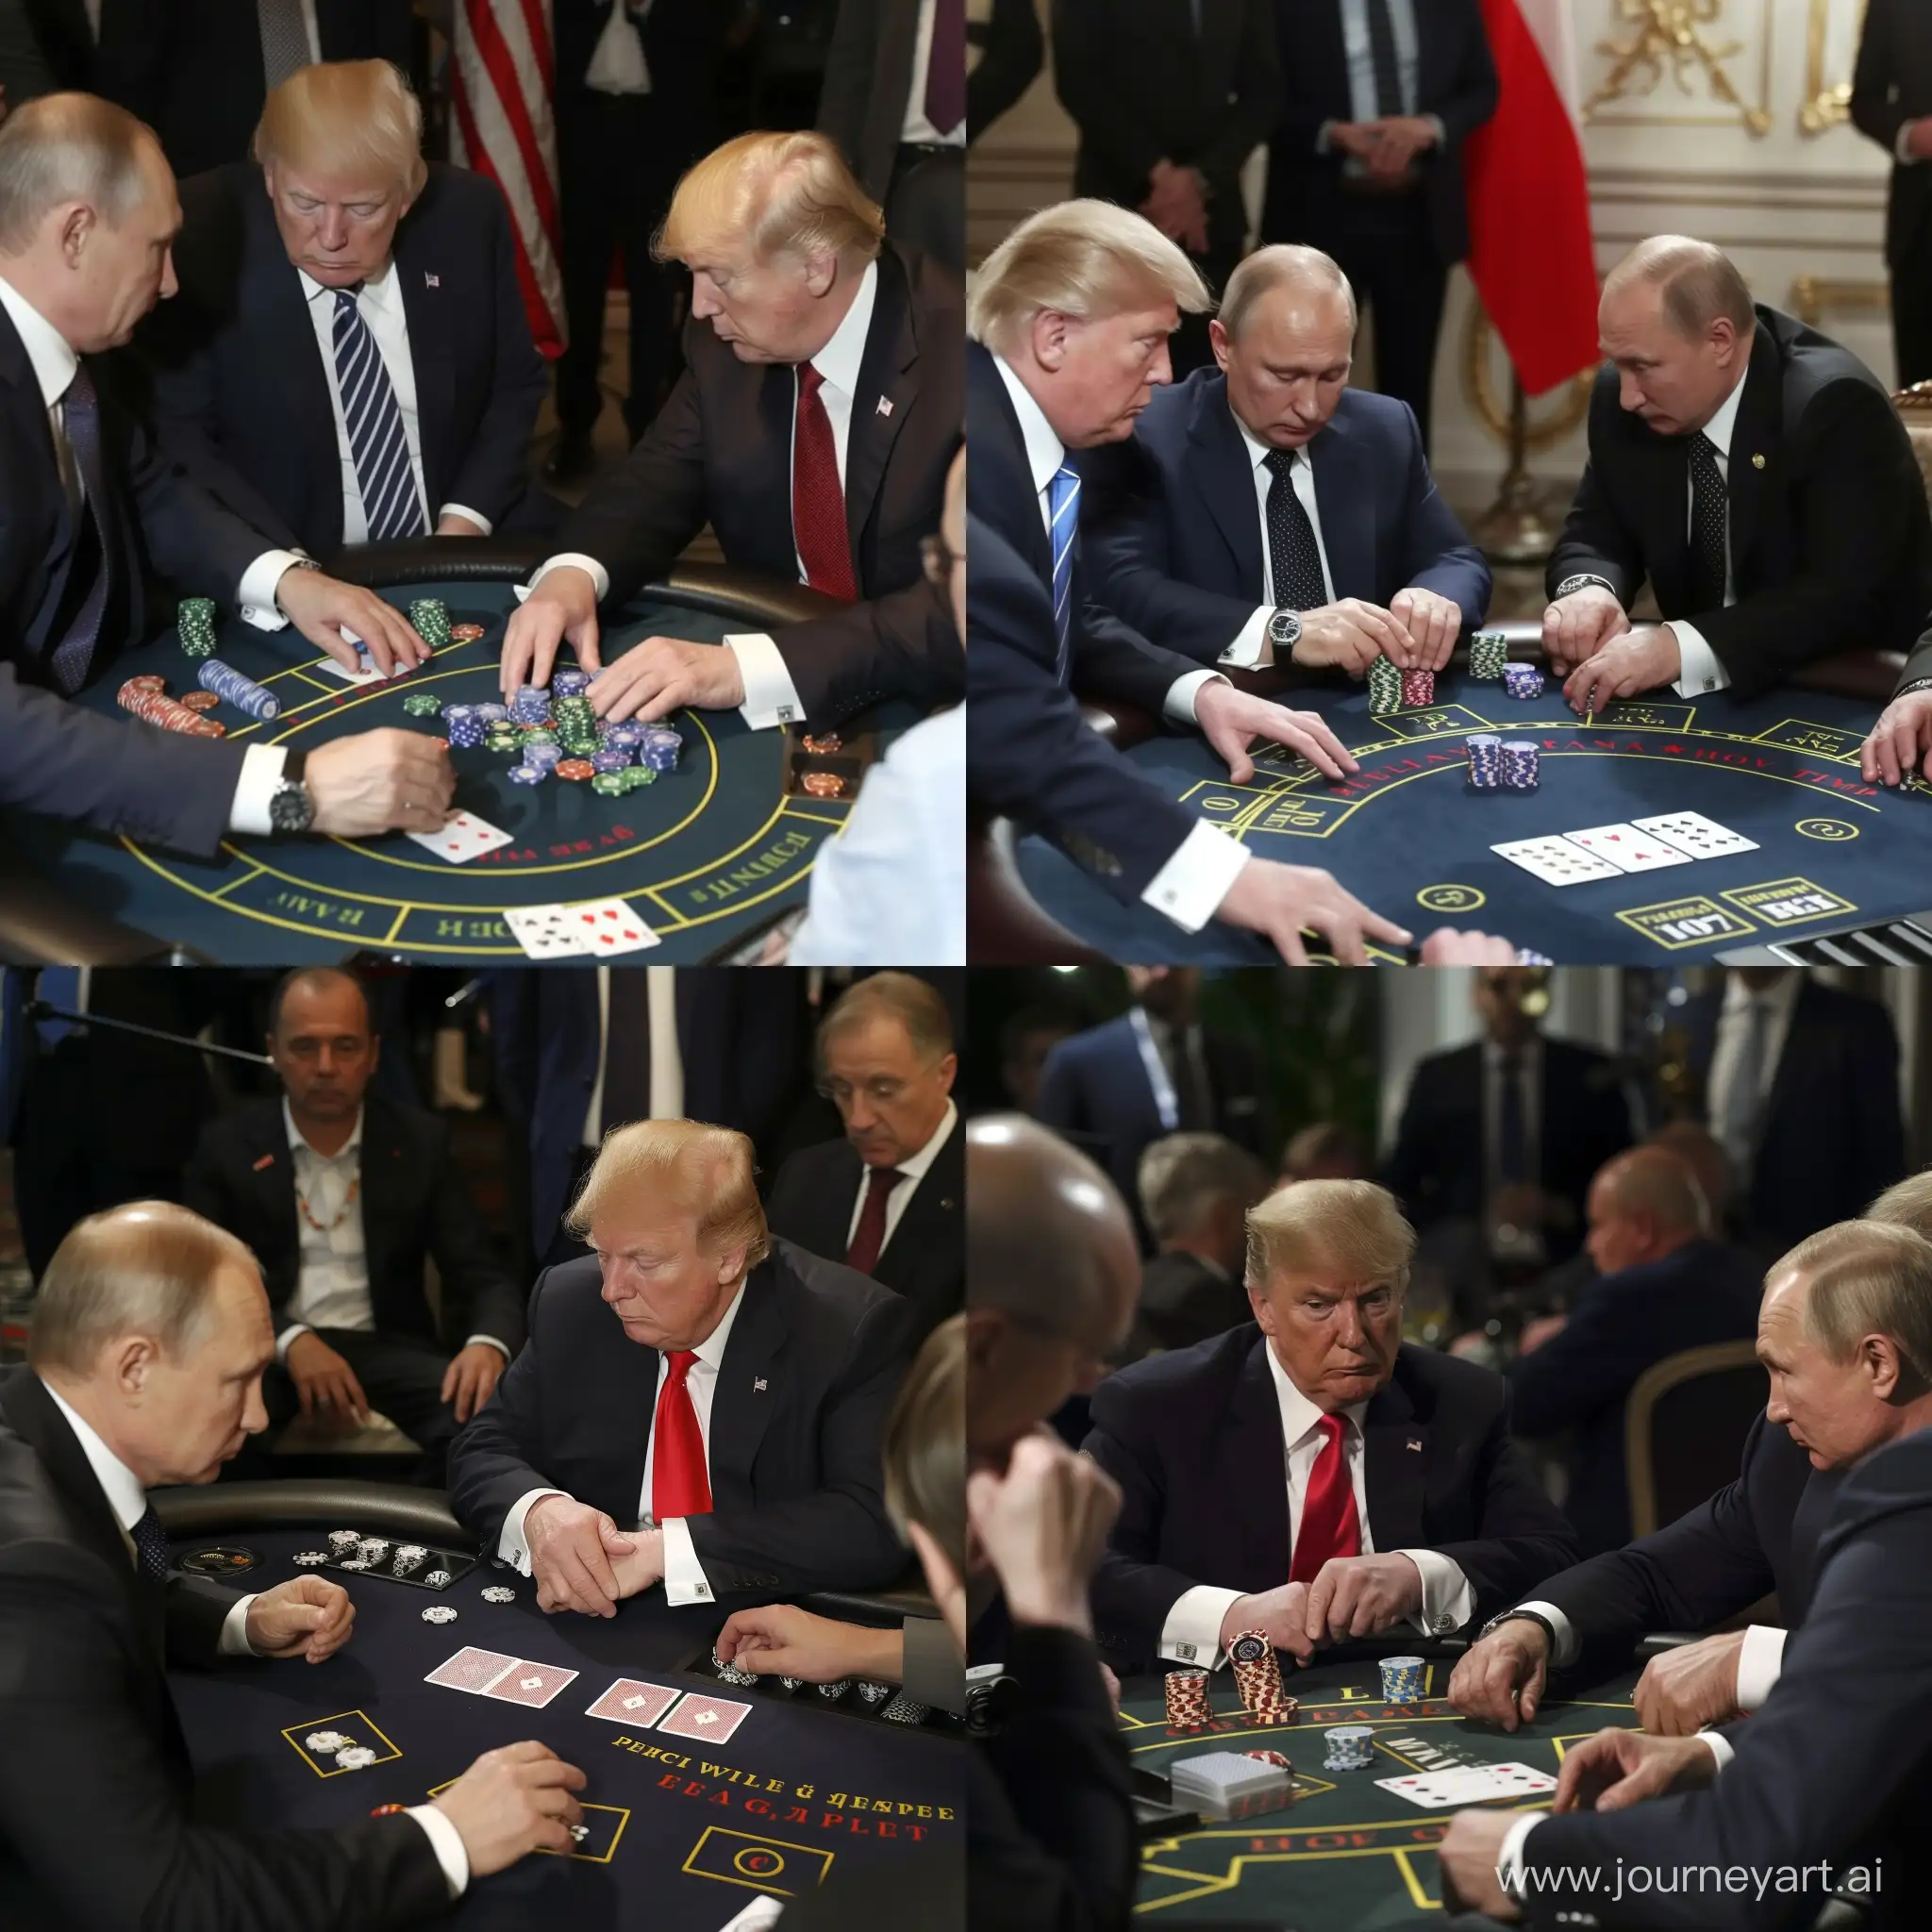 Putin and Trump playing poker with Europe on table